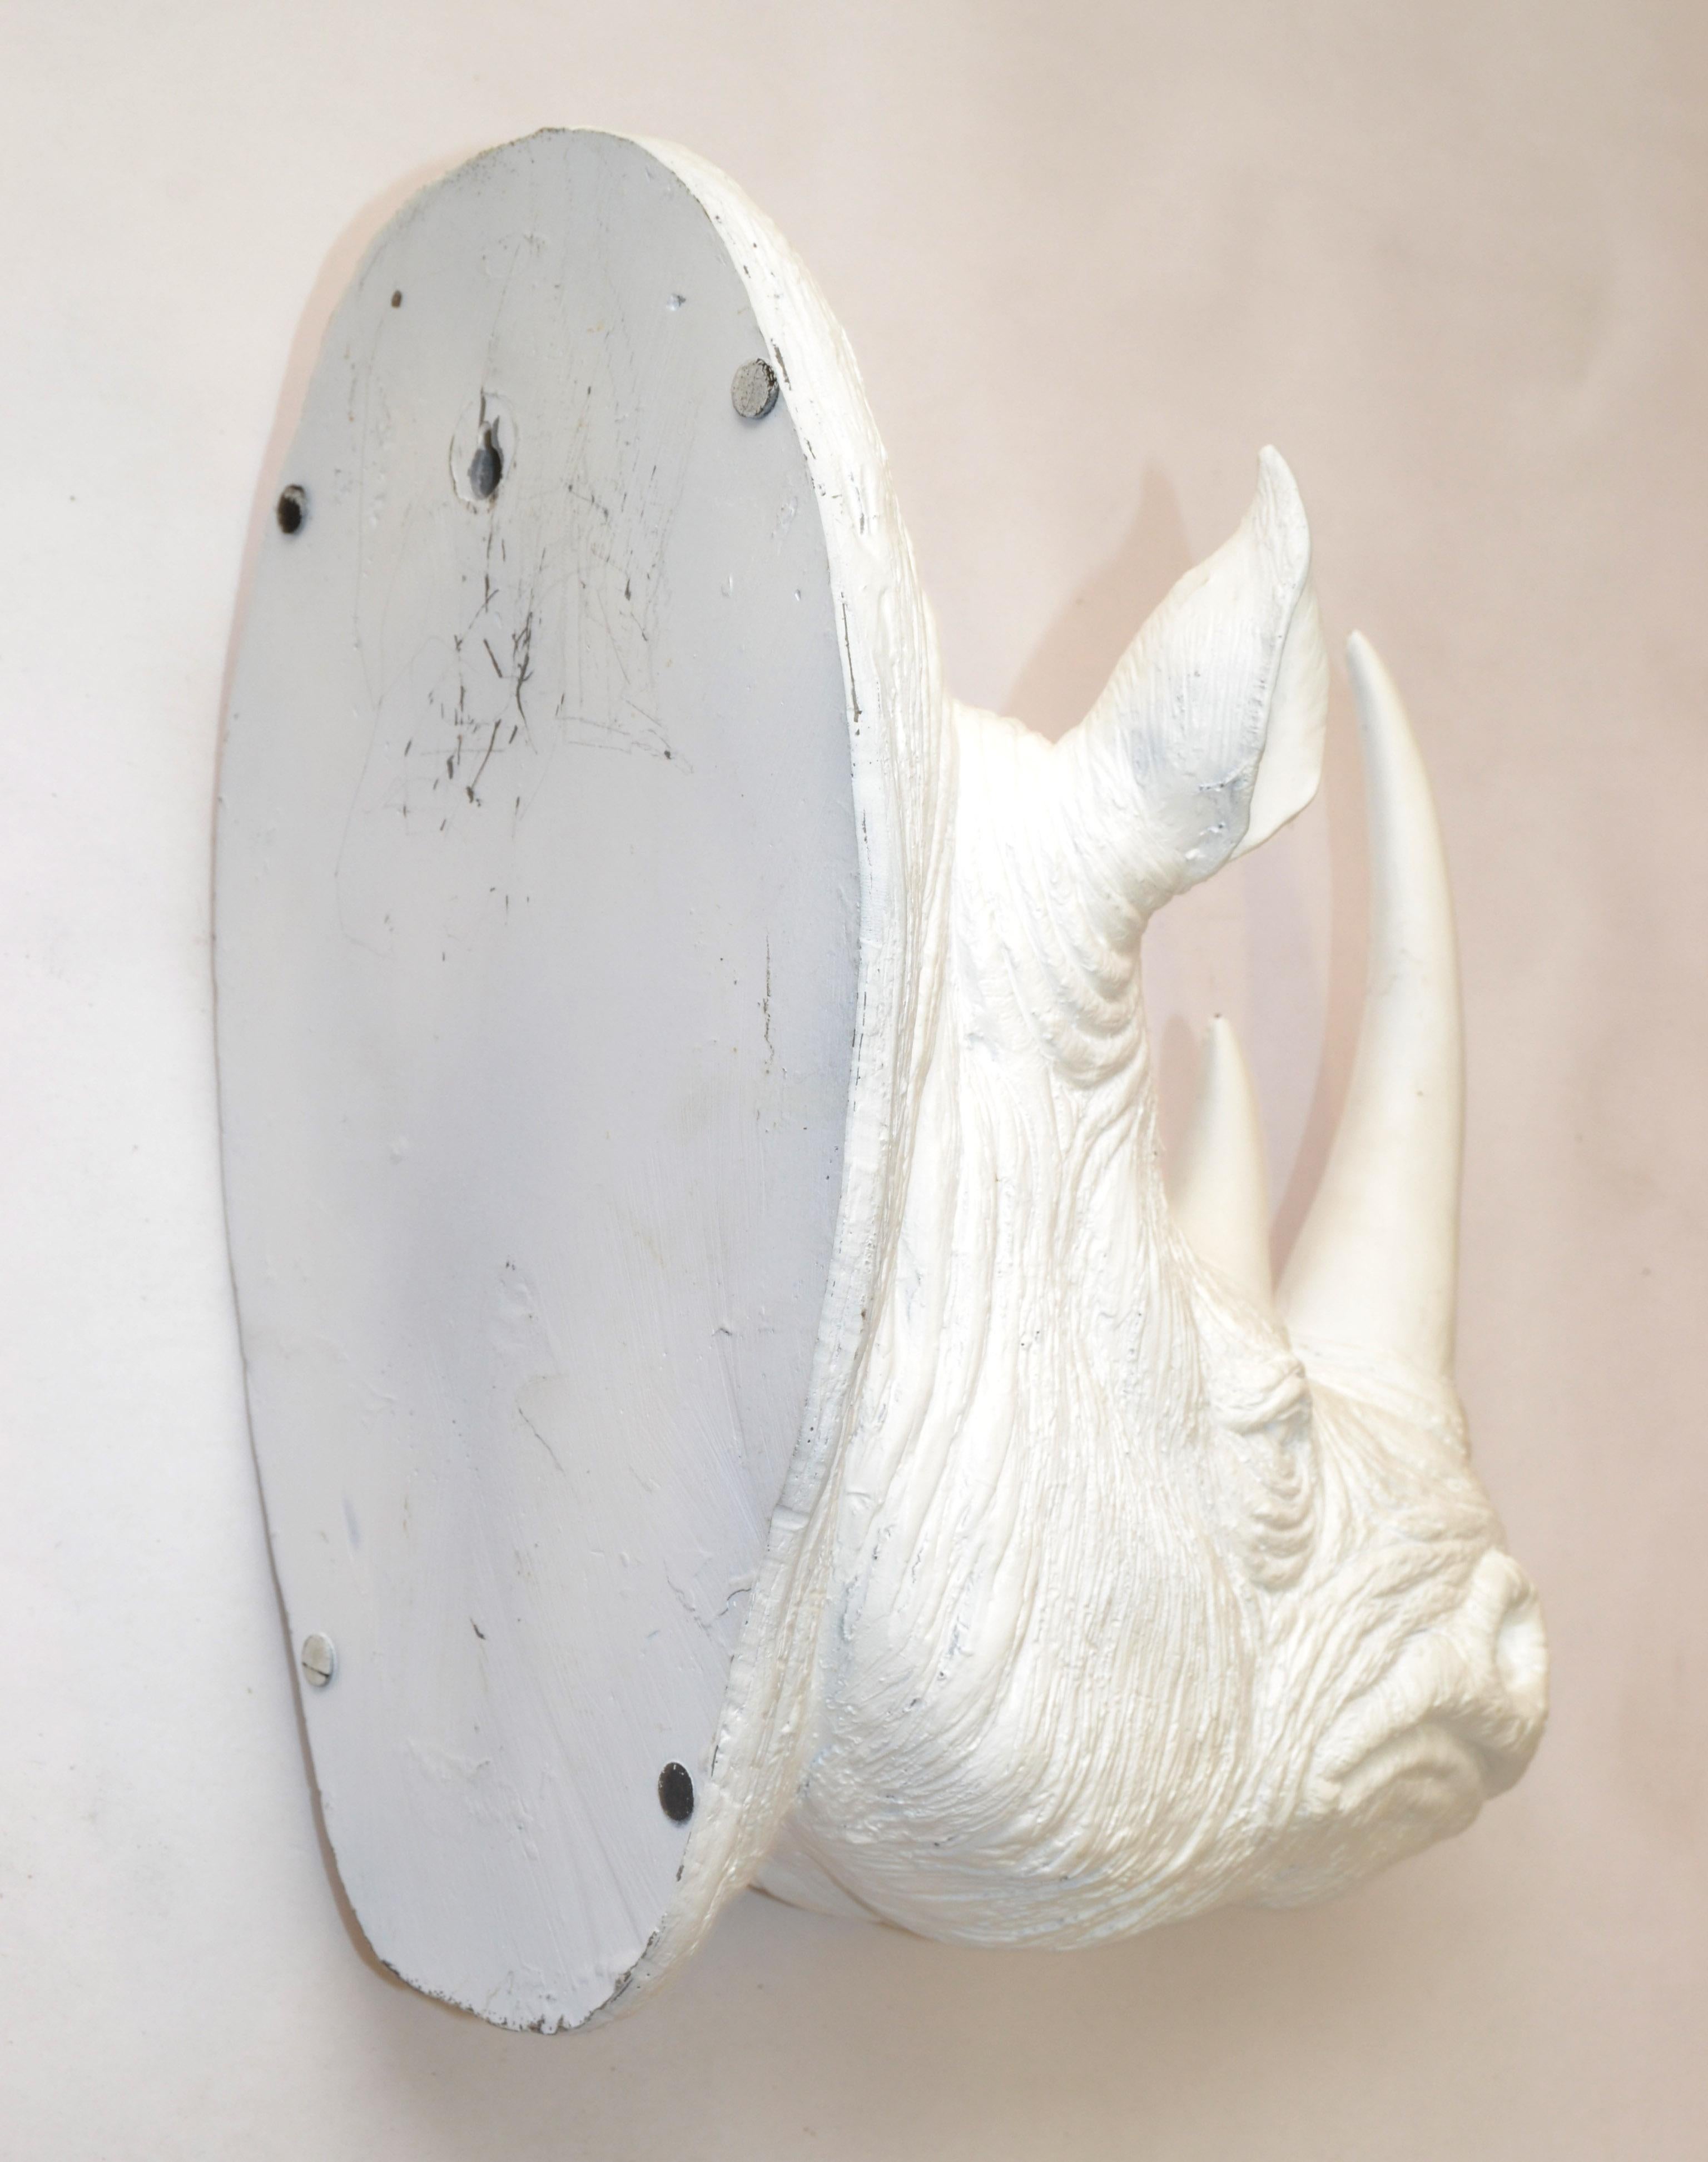  Faux Taxidermy White Trophy Wall Mounted Rhino Head Animal Sculpture Fine Art For Sale 1